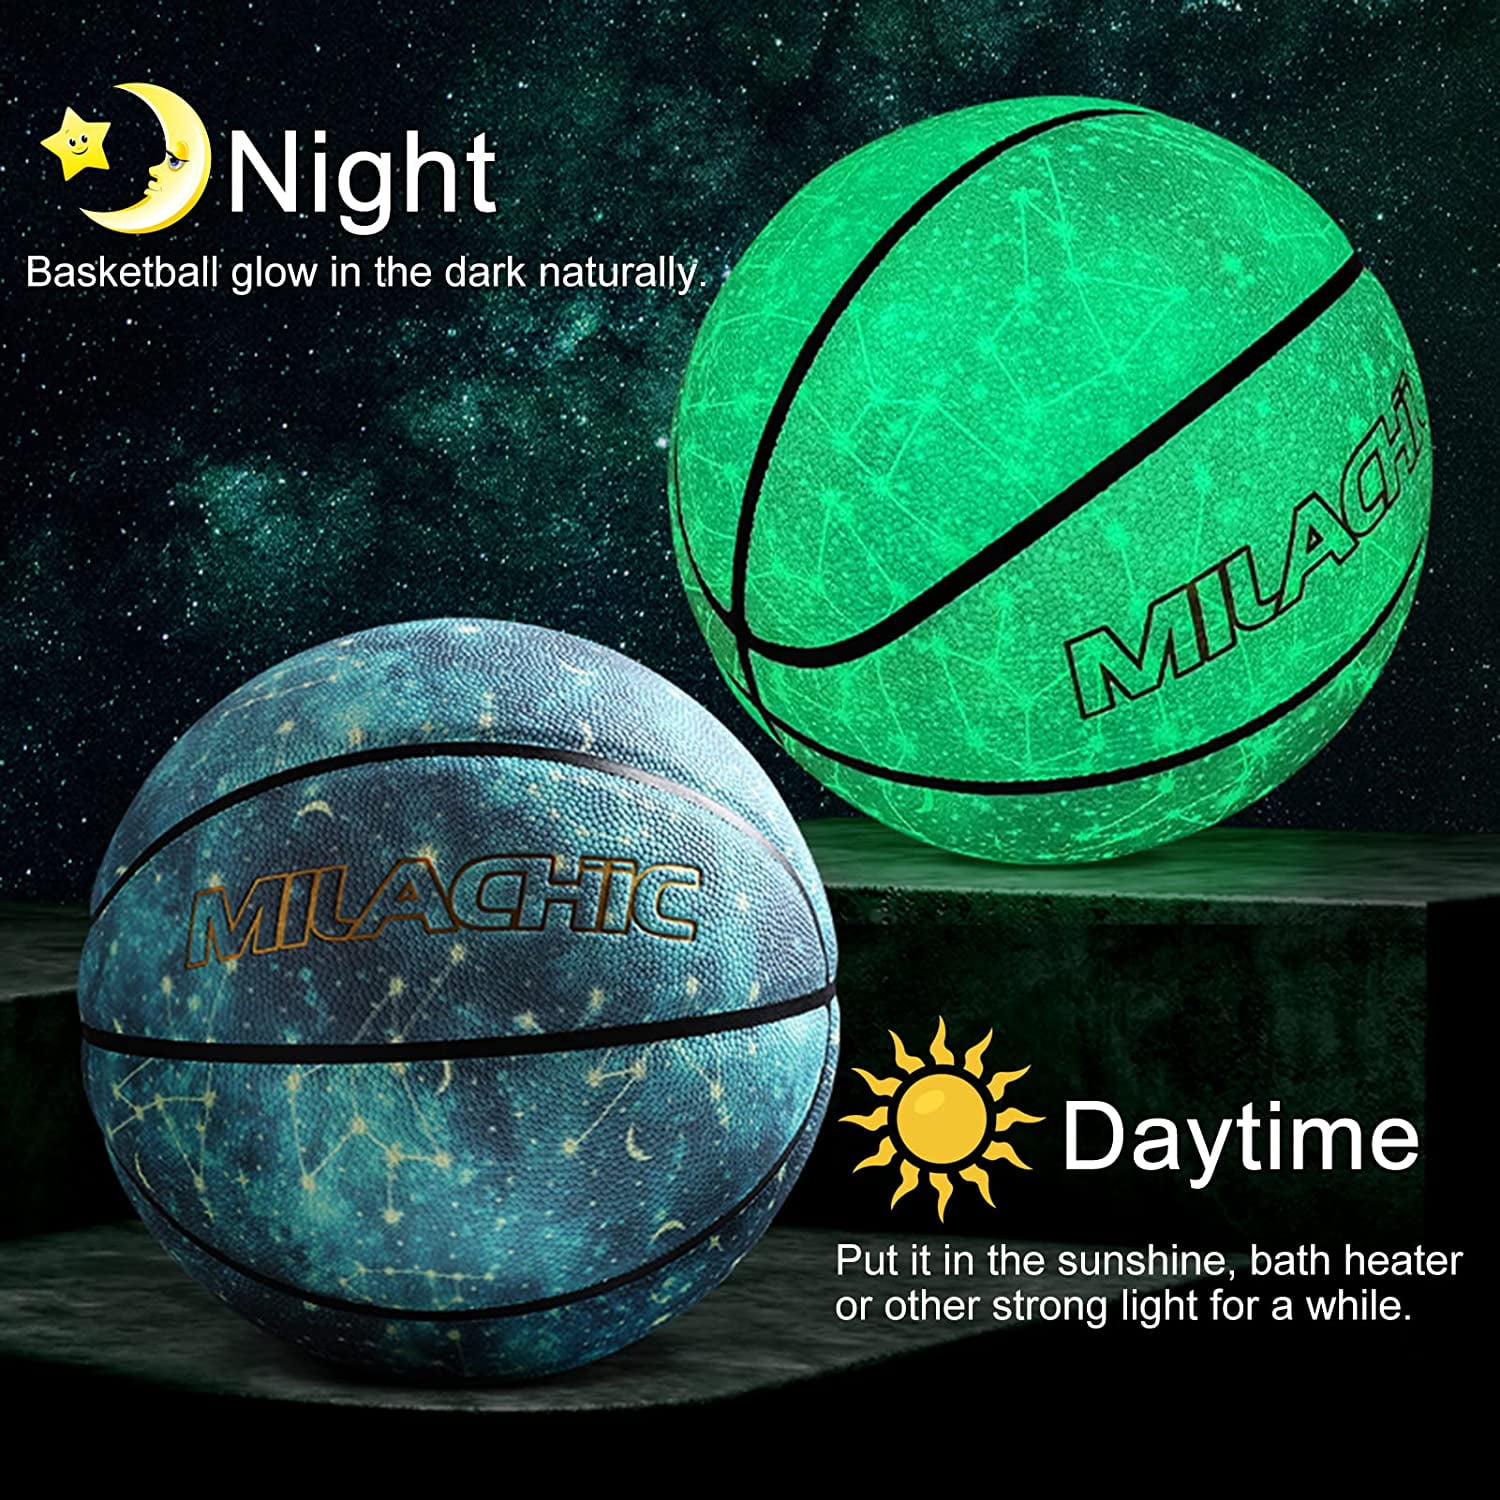 Milachic Glow in The Dark Basketball Indoor-Outdoor Light up Green Basketball Official Size 7 29.5in Leather Glowing Basketball Gifts with Pump for Kids Men Night Training Game 